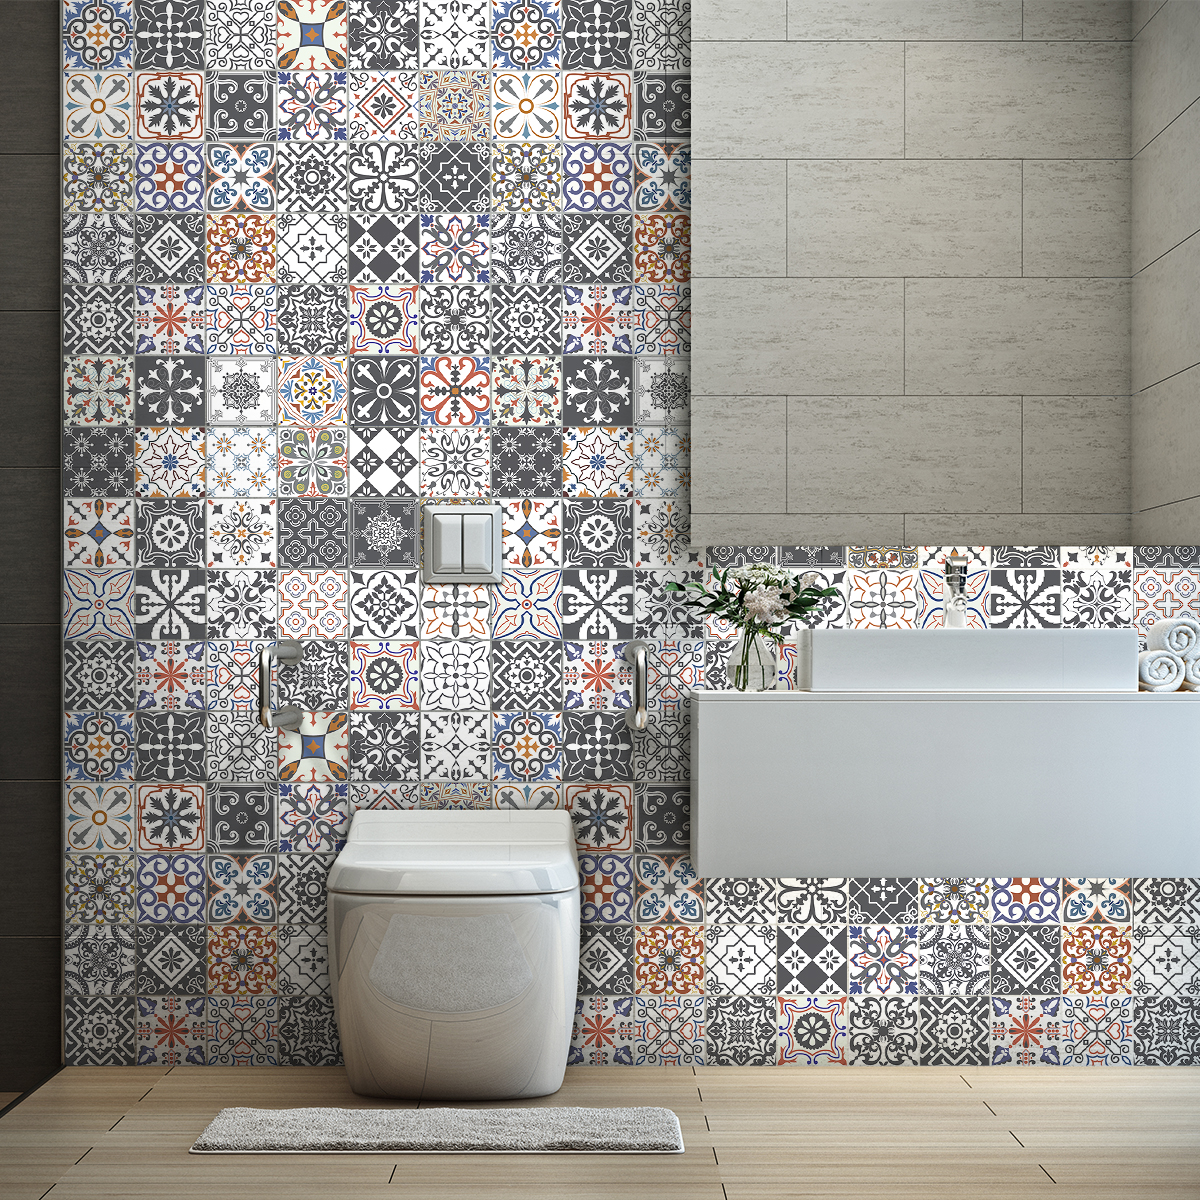 60 wall decal cement tiles azulejos thazia